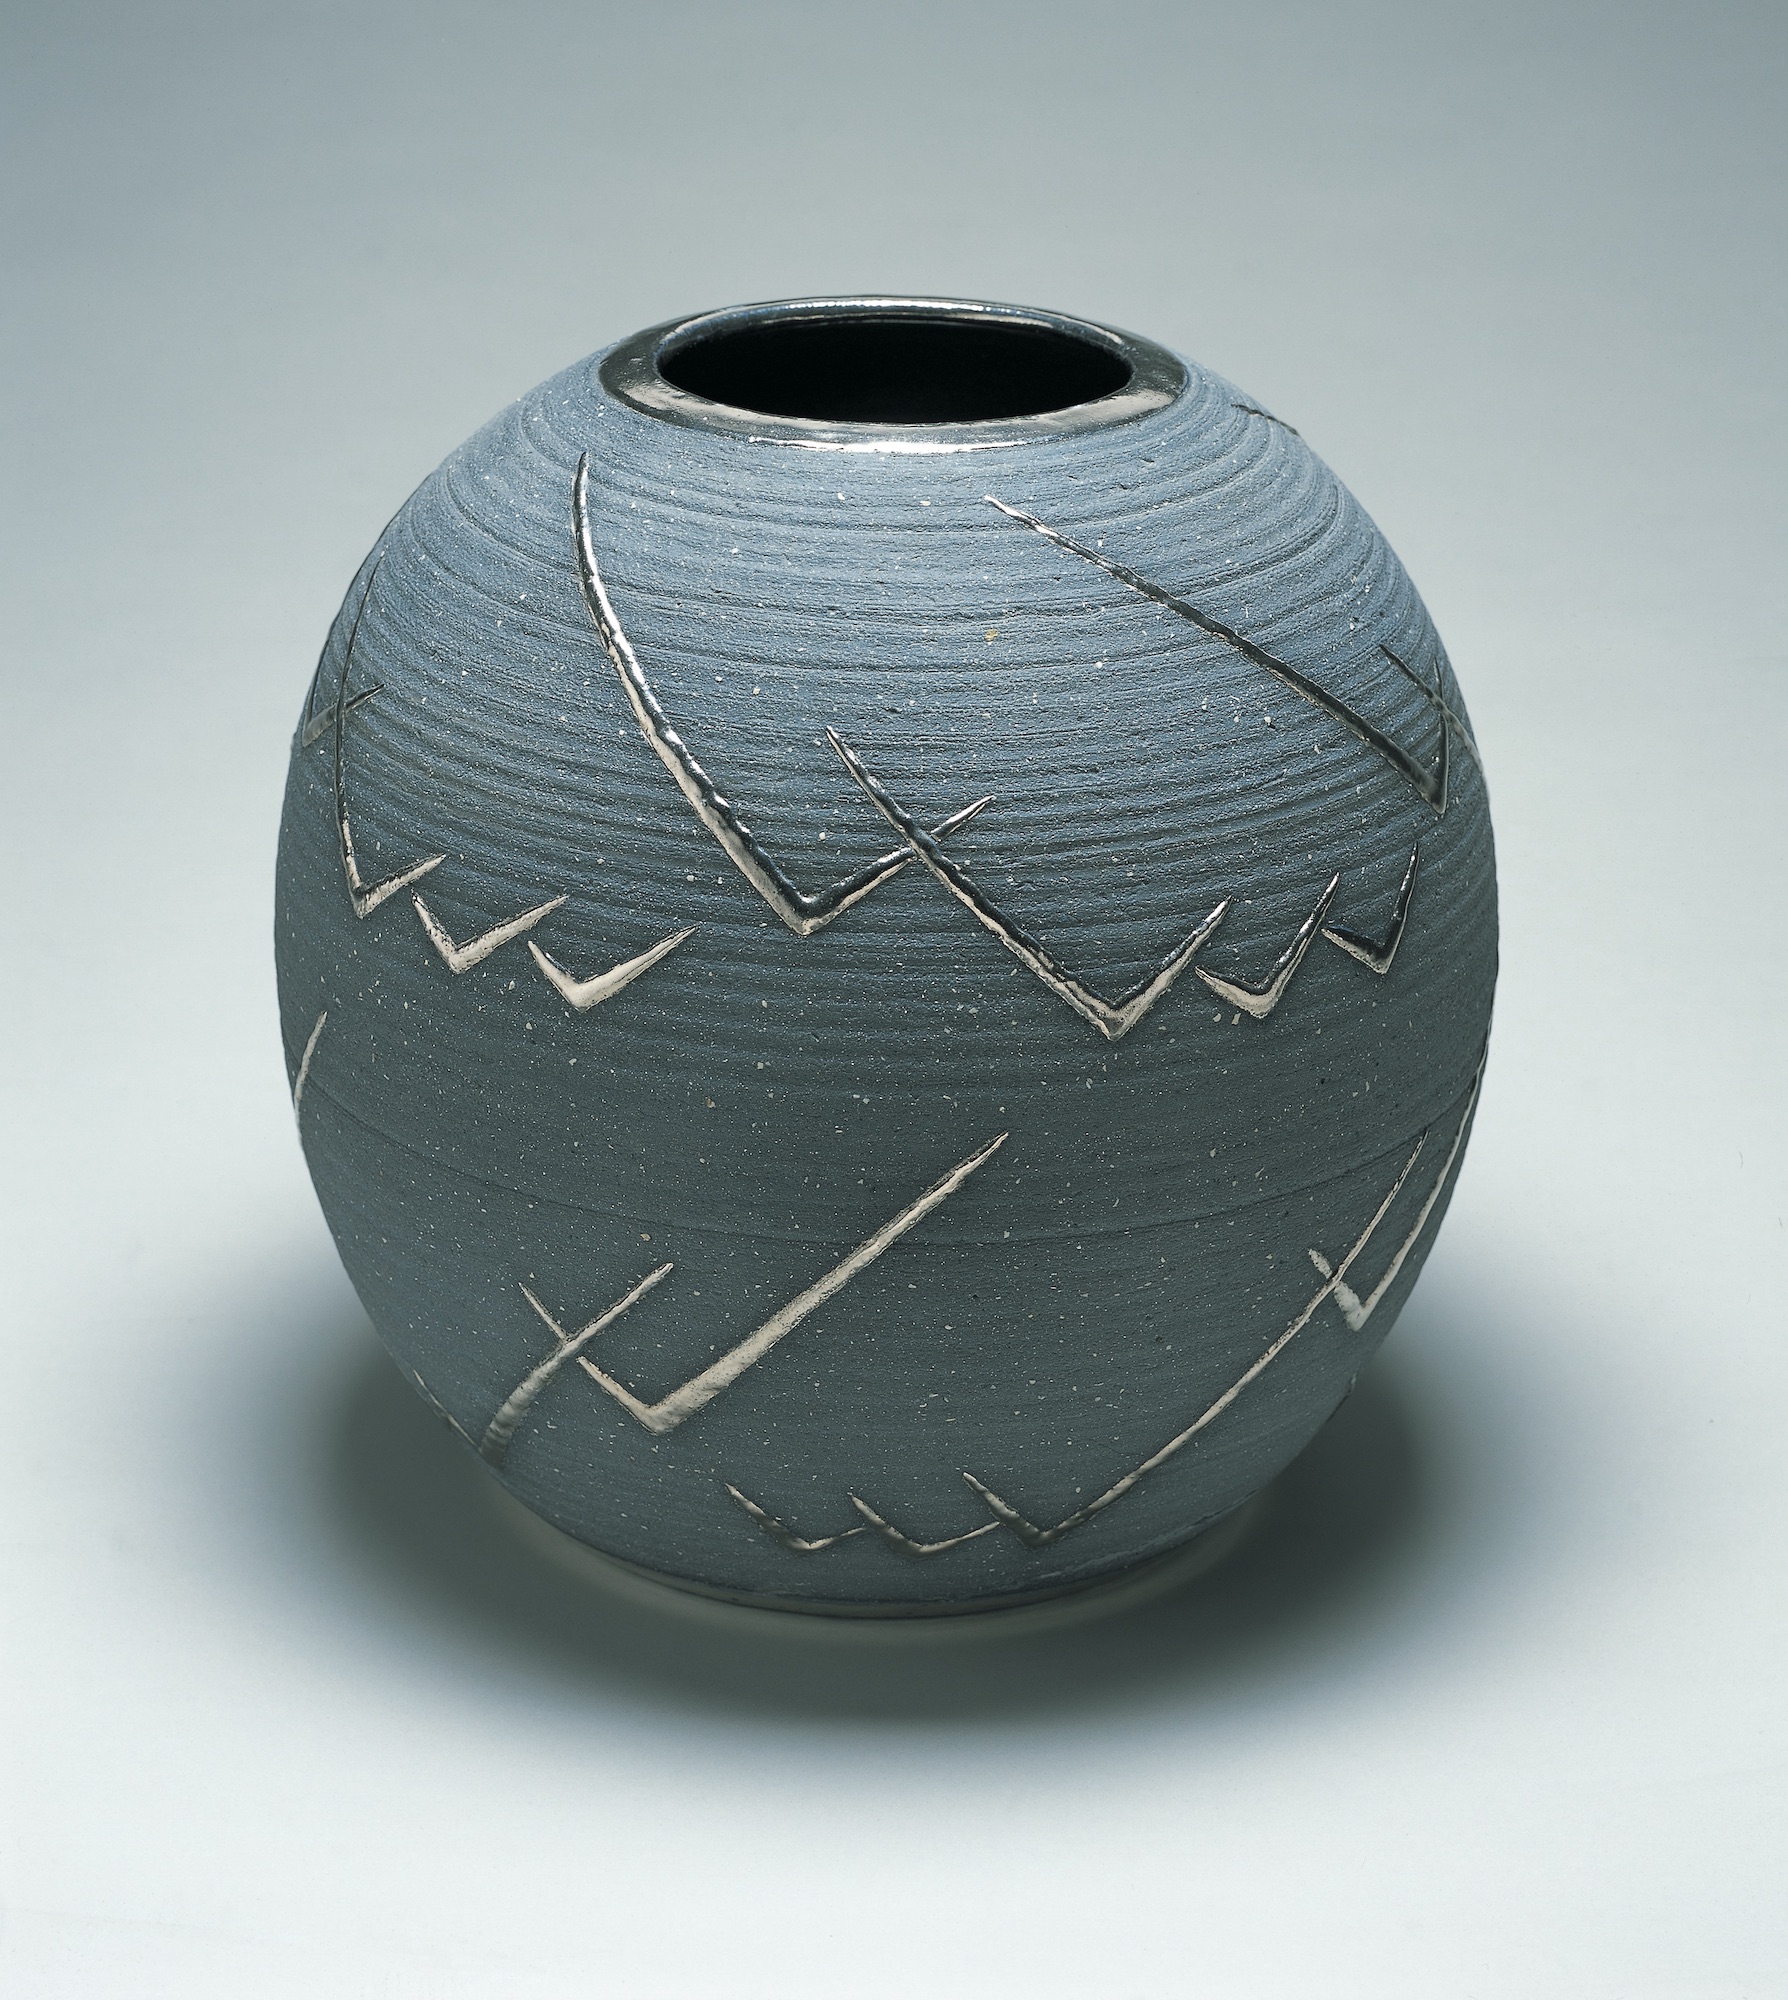 Maija Grotell, vase circa 1943 or earlier from Cranbrook Museum of Art Collection 